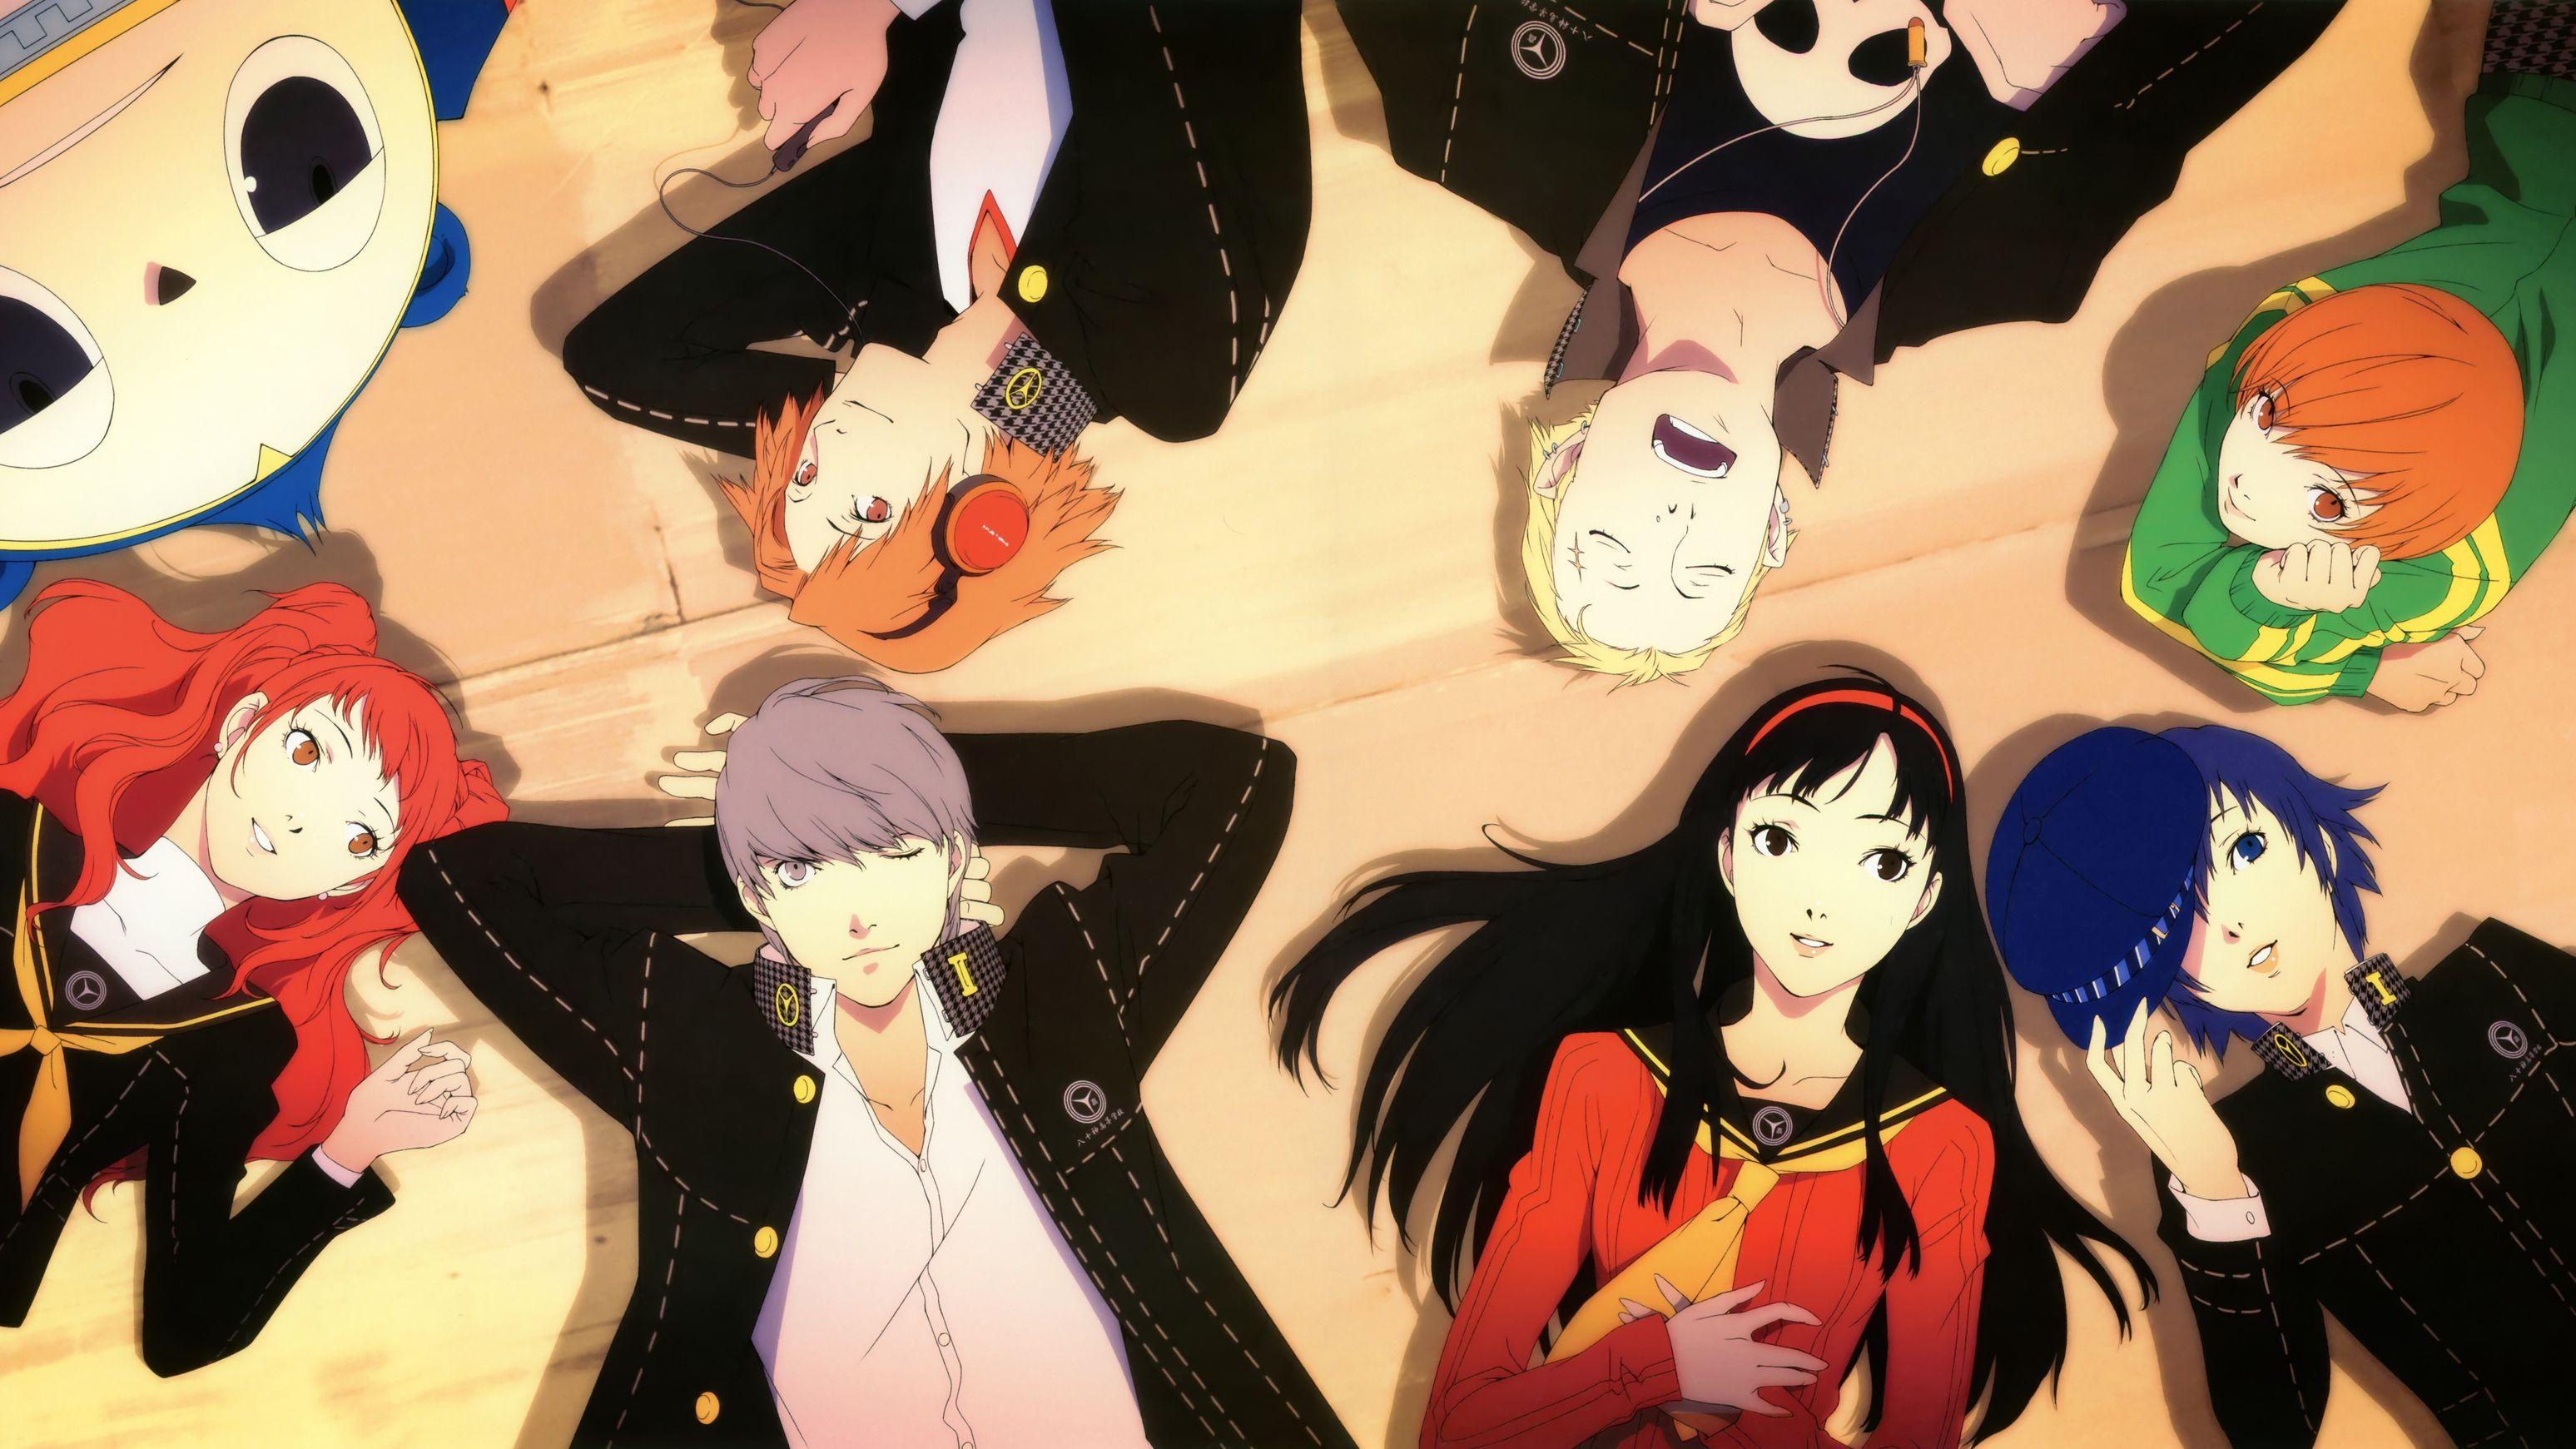 Persona 4 Golden is only $9.89 on the PS Vita right now